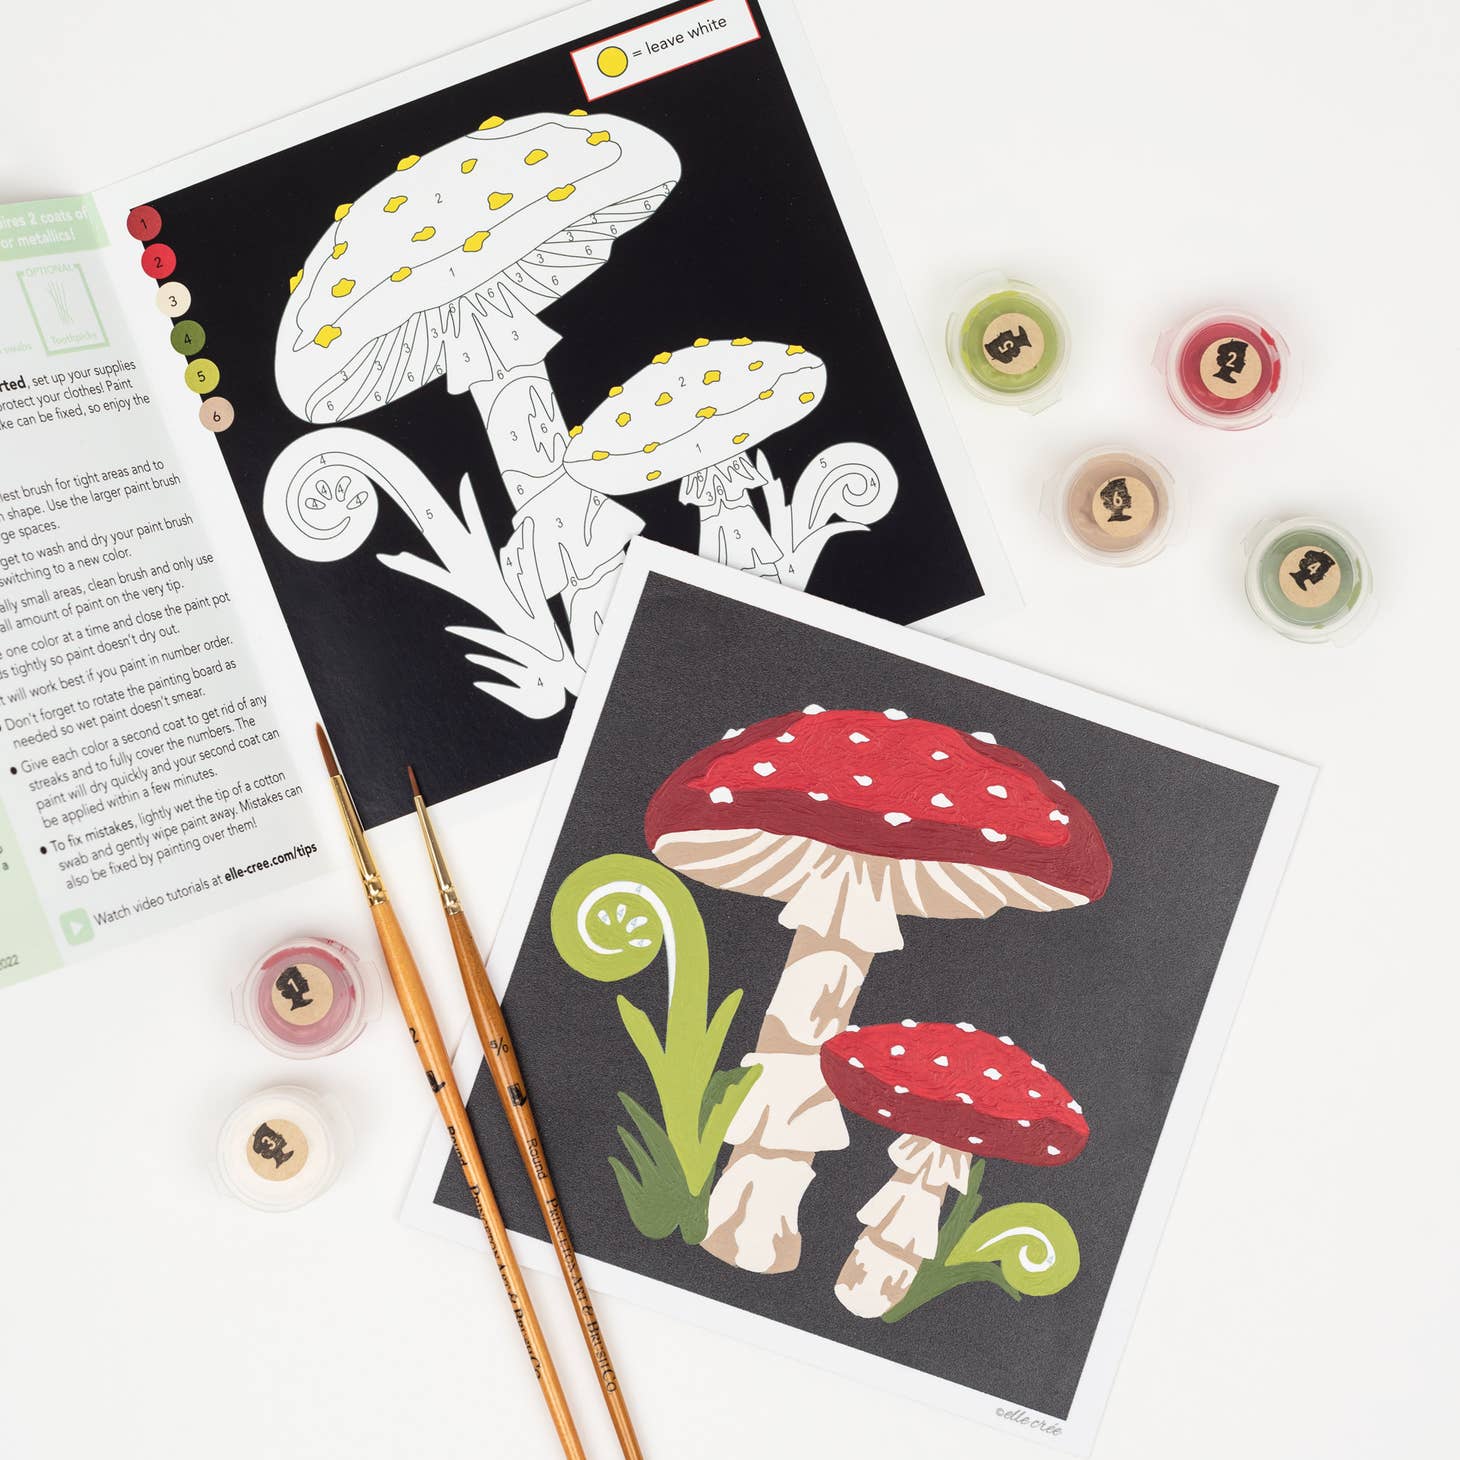 Fly Agaric Mushrooms MINI Paint-by-Number Kit - Storm and Sky Shoppe